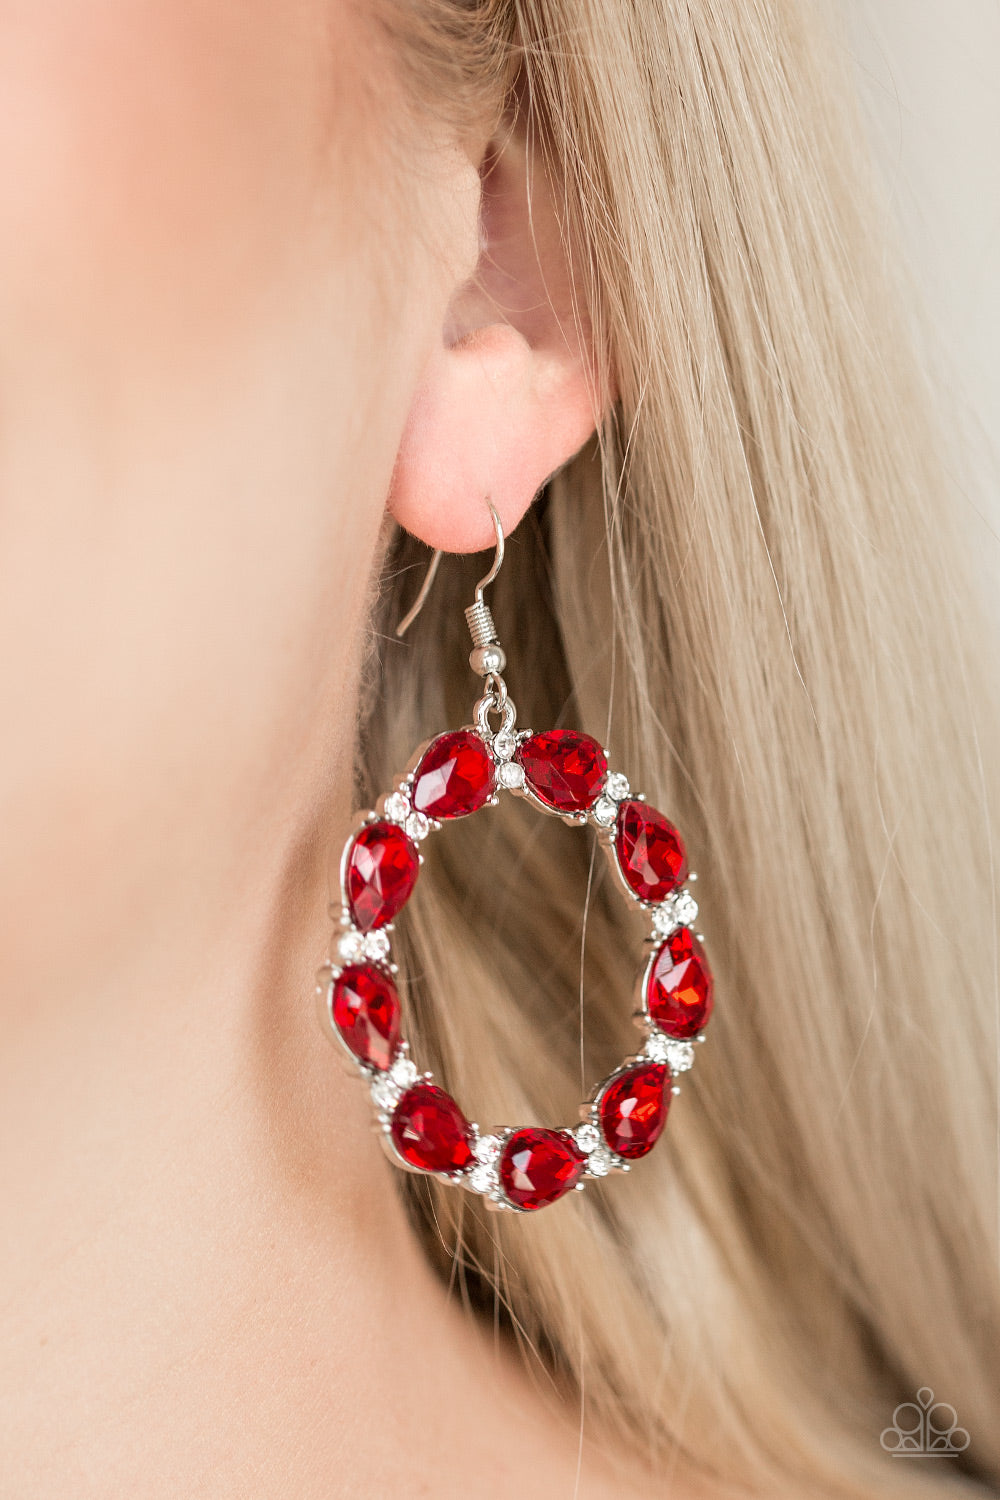 Paparazzi Accessories Ring Around the Rhinestones - Red Earrings - Lady T Accessories